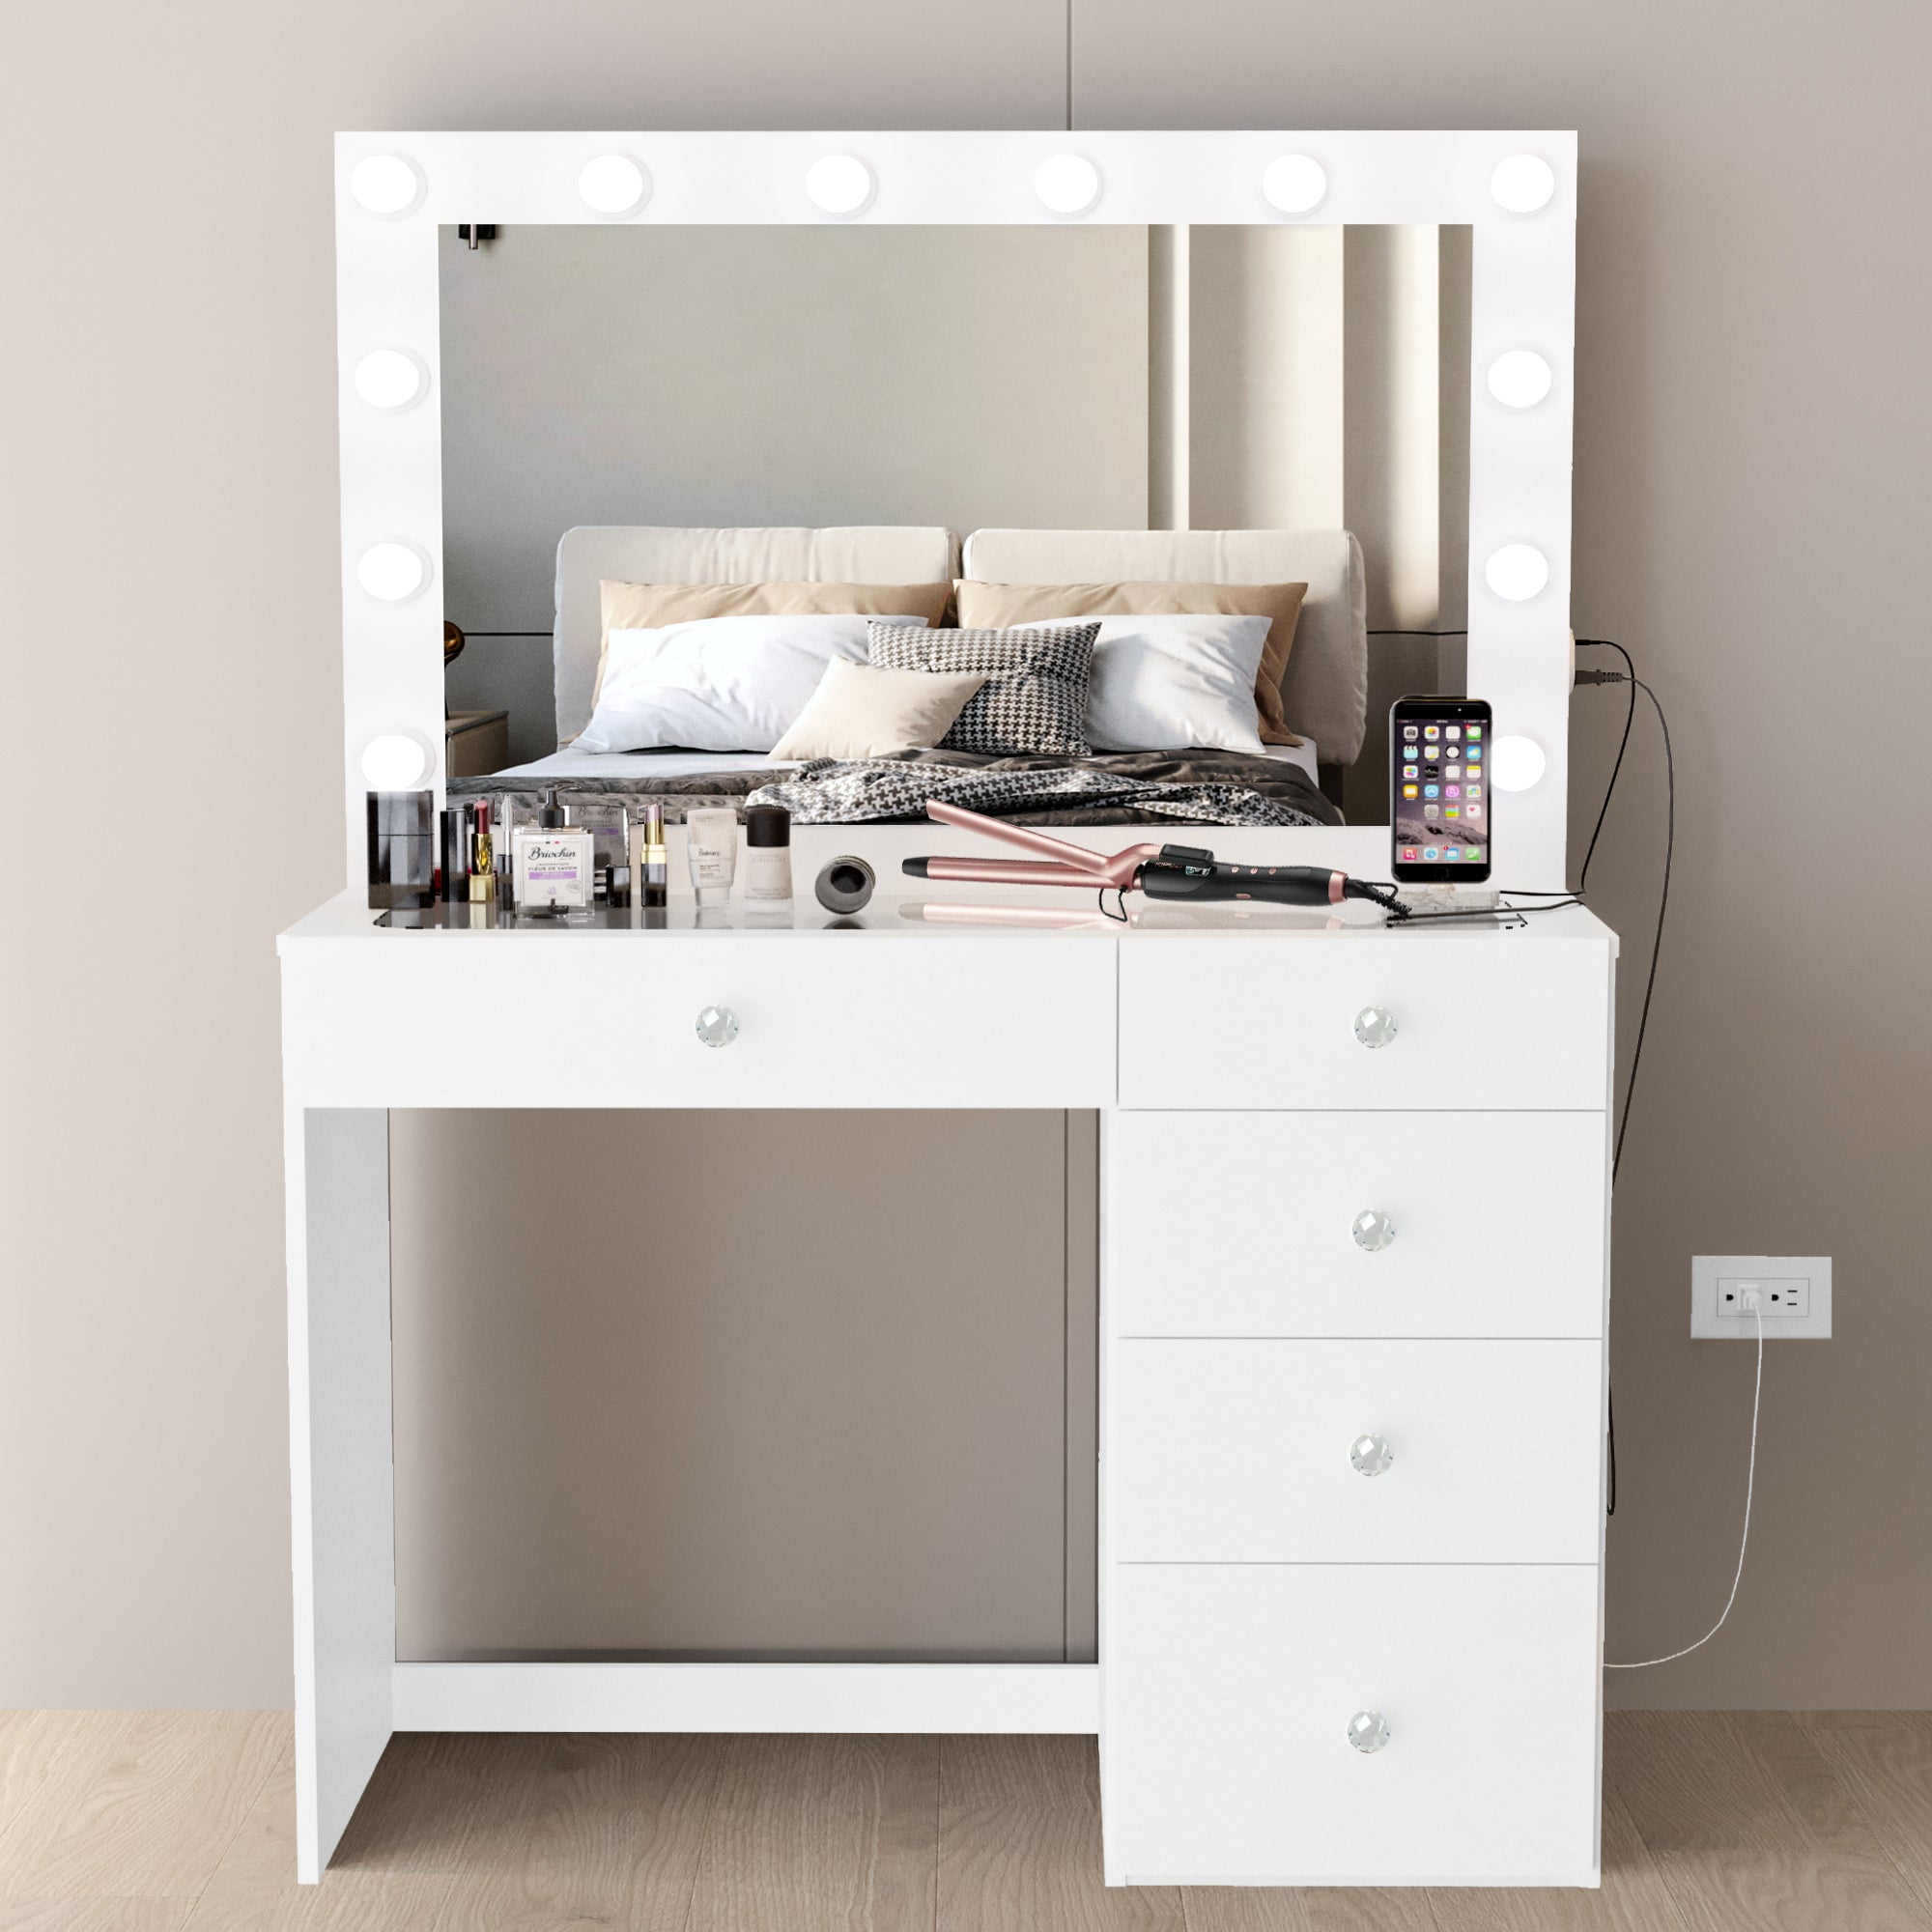 Boahaus Alana with Lights, Crystal White Black Vanity Desk Ball and Knobs, Drawers, Mirror 5